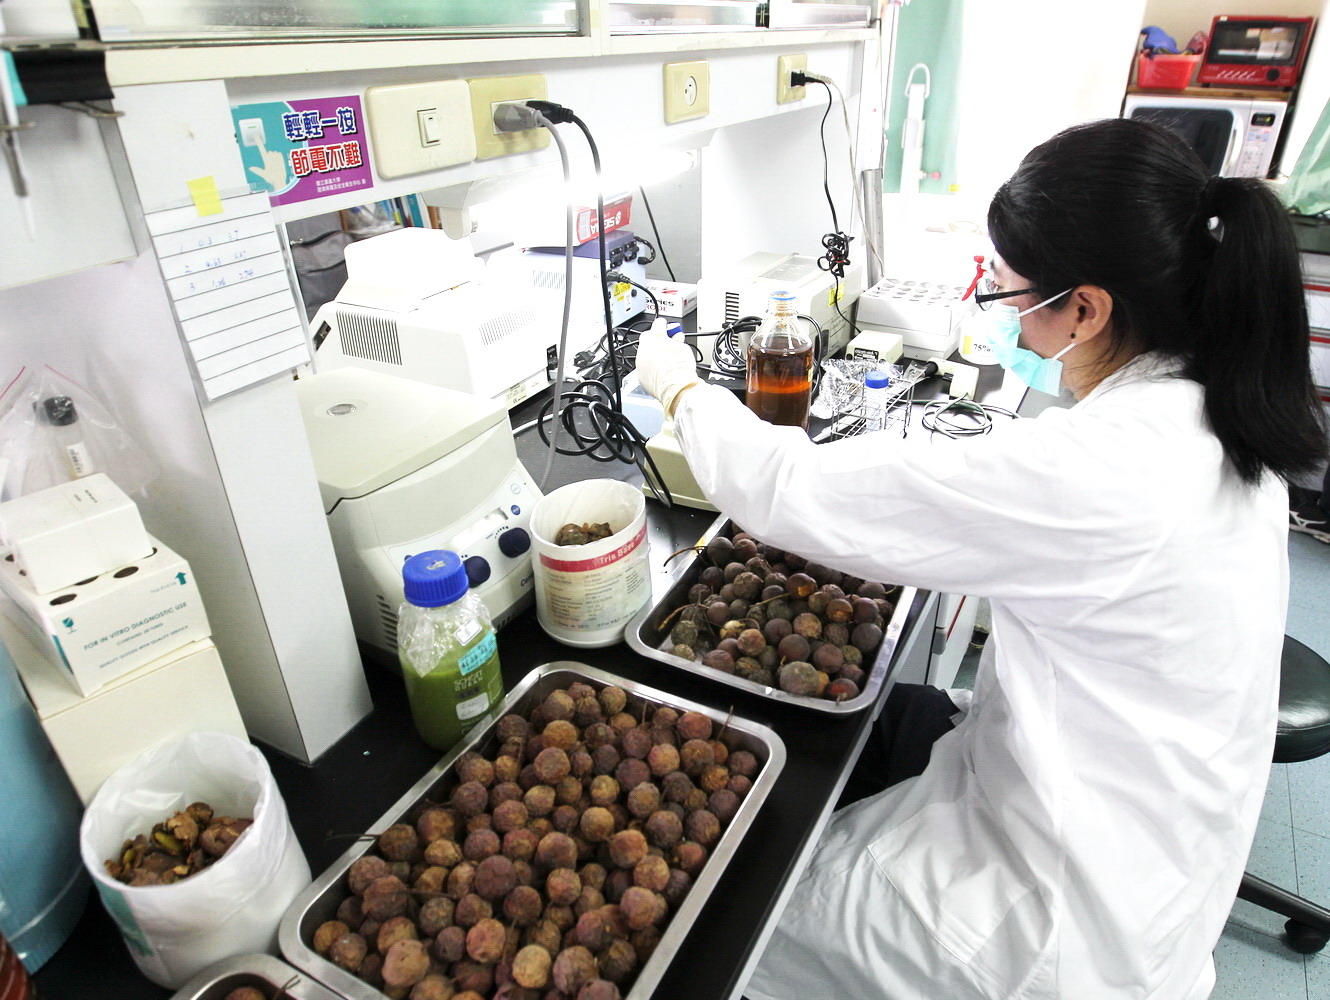 The College of Life Sciences puts emphasis on both academic knowledge and experimental skills. The students may select laboratories to pursue their individual research project based on their own interest. 